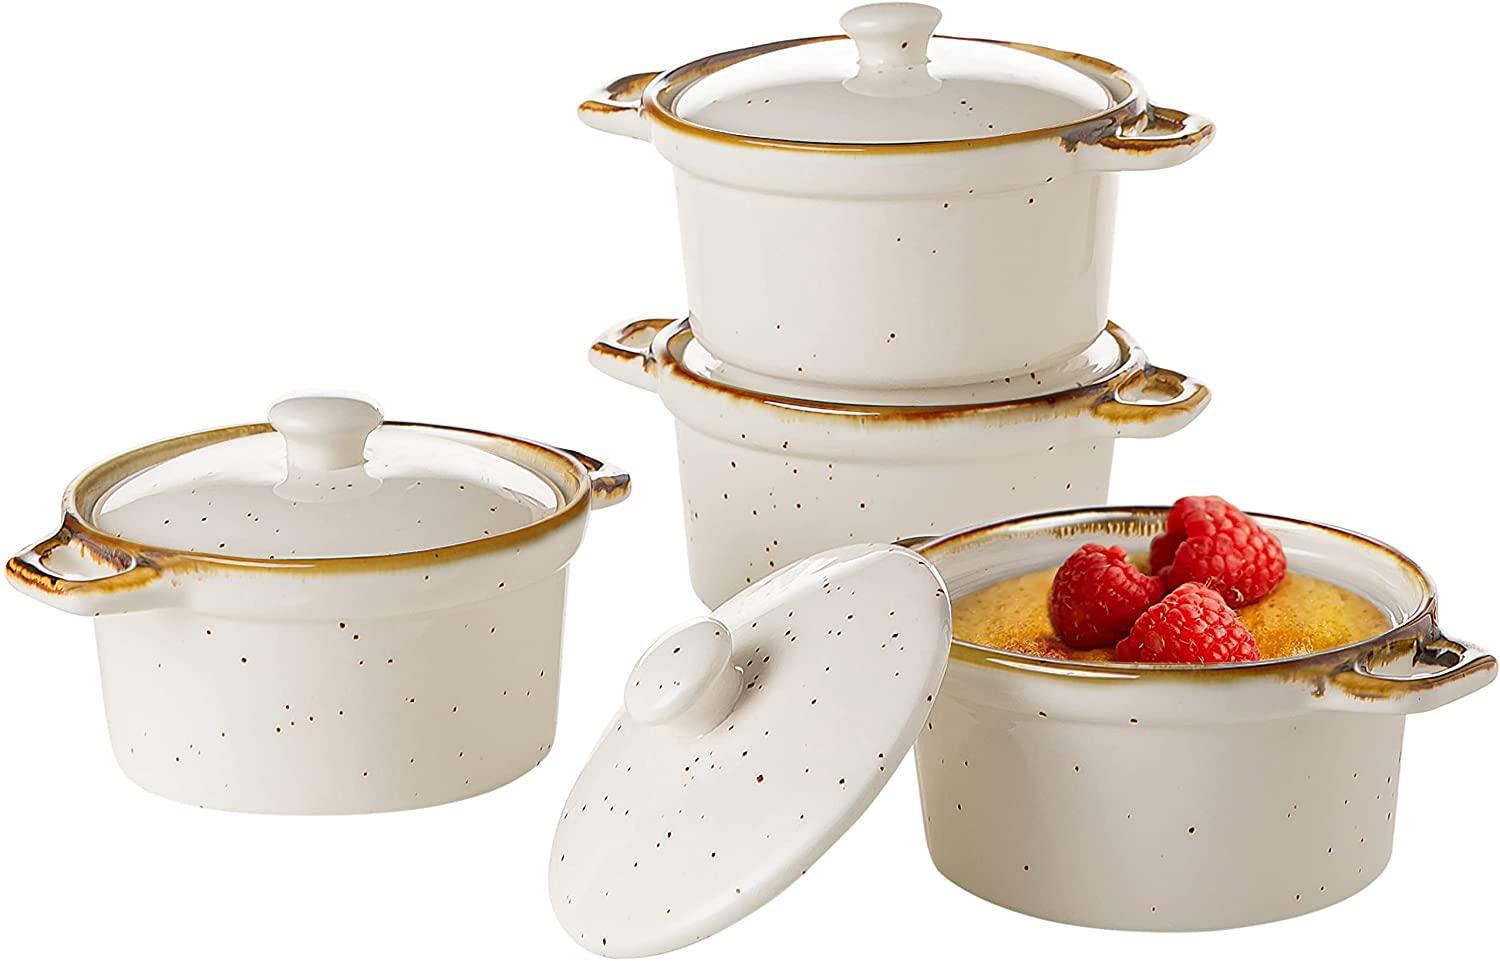 contenpo onemore ceramic ramekins with lids - 6oz, set of 4 - oven safe small casserole dish with handles - cocotte set for individual